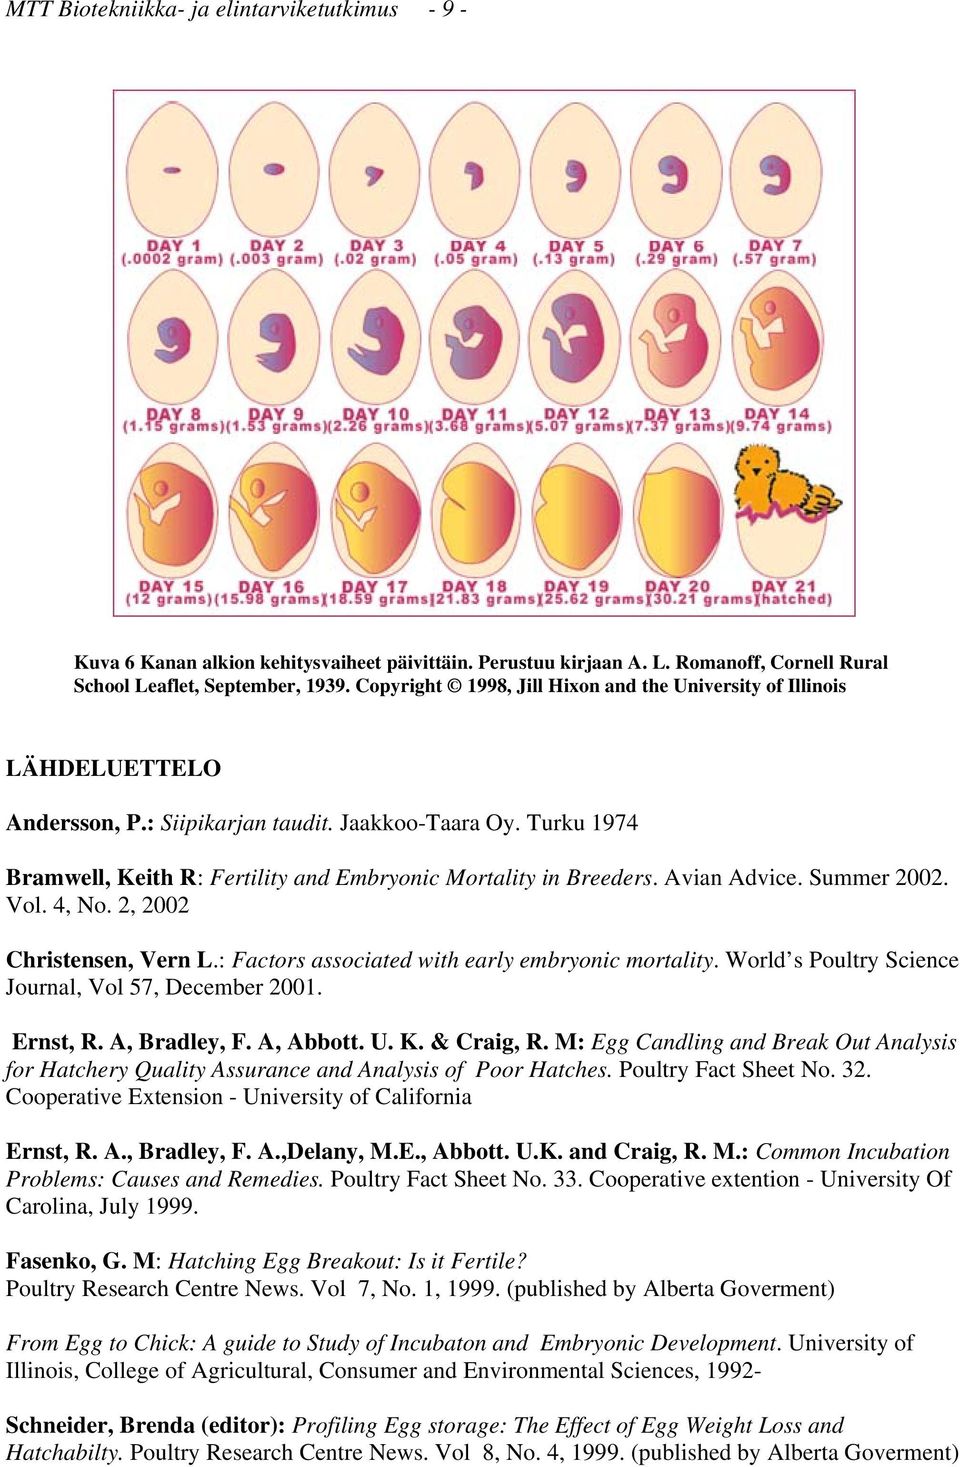 Turku 1974 Bramwell, Keith R: Fertility and Embryonic Mortality in Breeders. Avian Advice. Summer 2002. Vol. 4, No. 2, 2002 Christensen, Vern L.: Factors associated with early embryonic mortality.